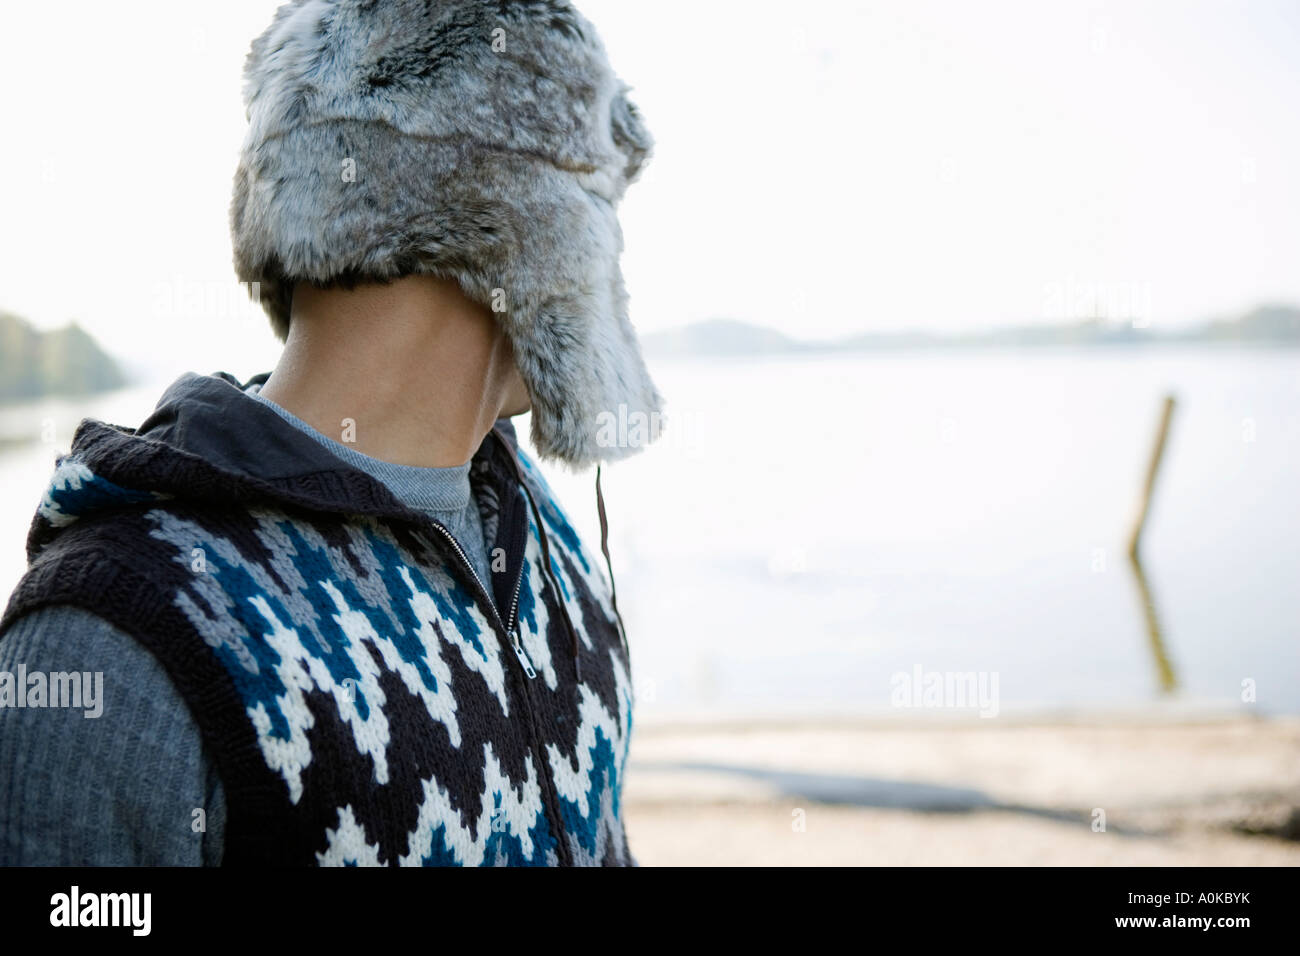 rear view of man looking at wintry lake Stock Photo